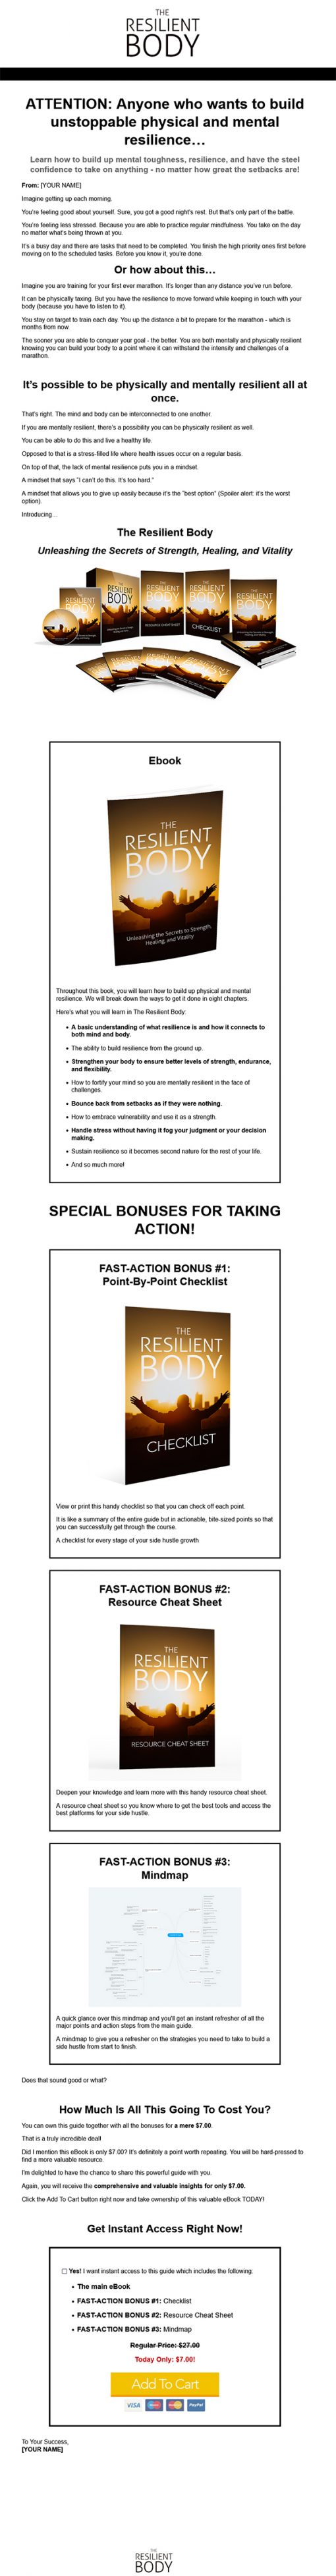 The Resilient Body Ebook and Videos MRR